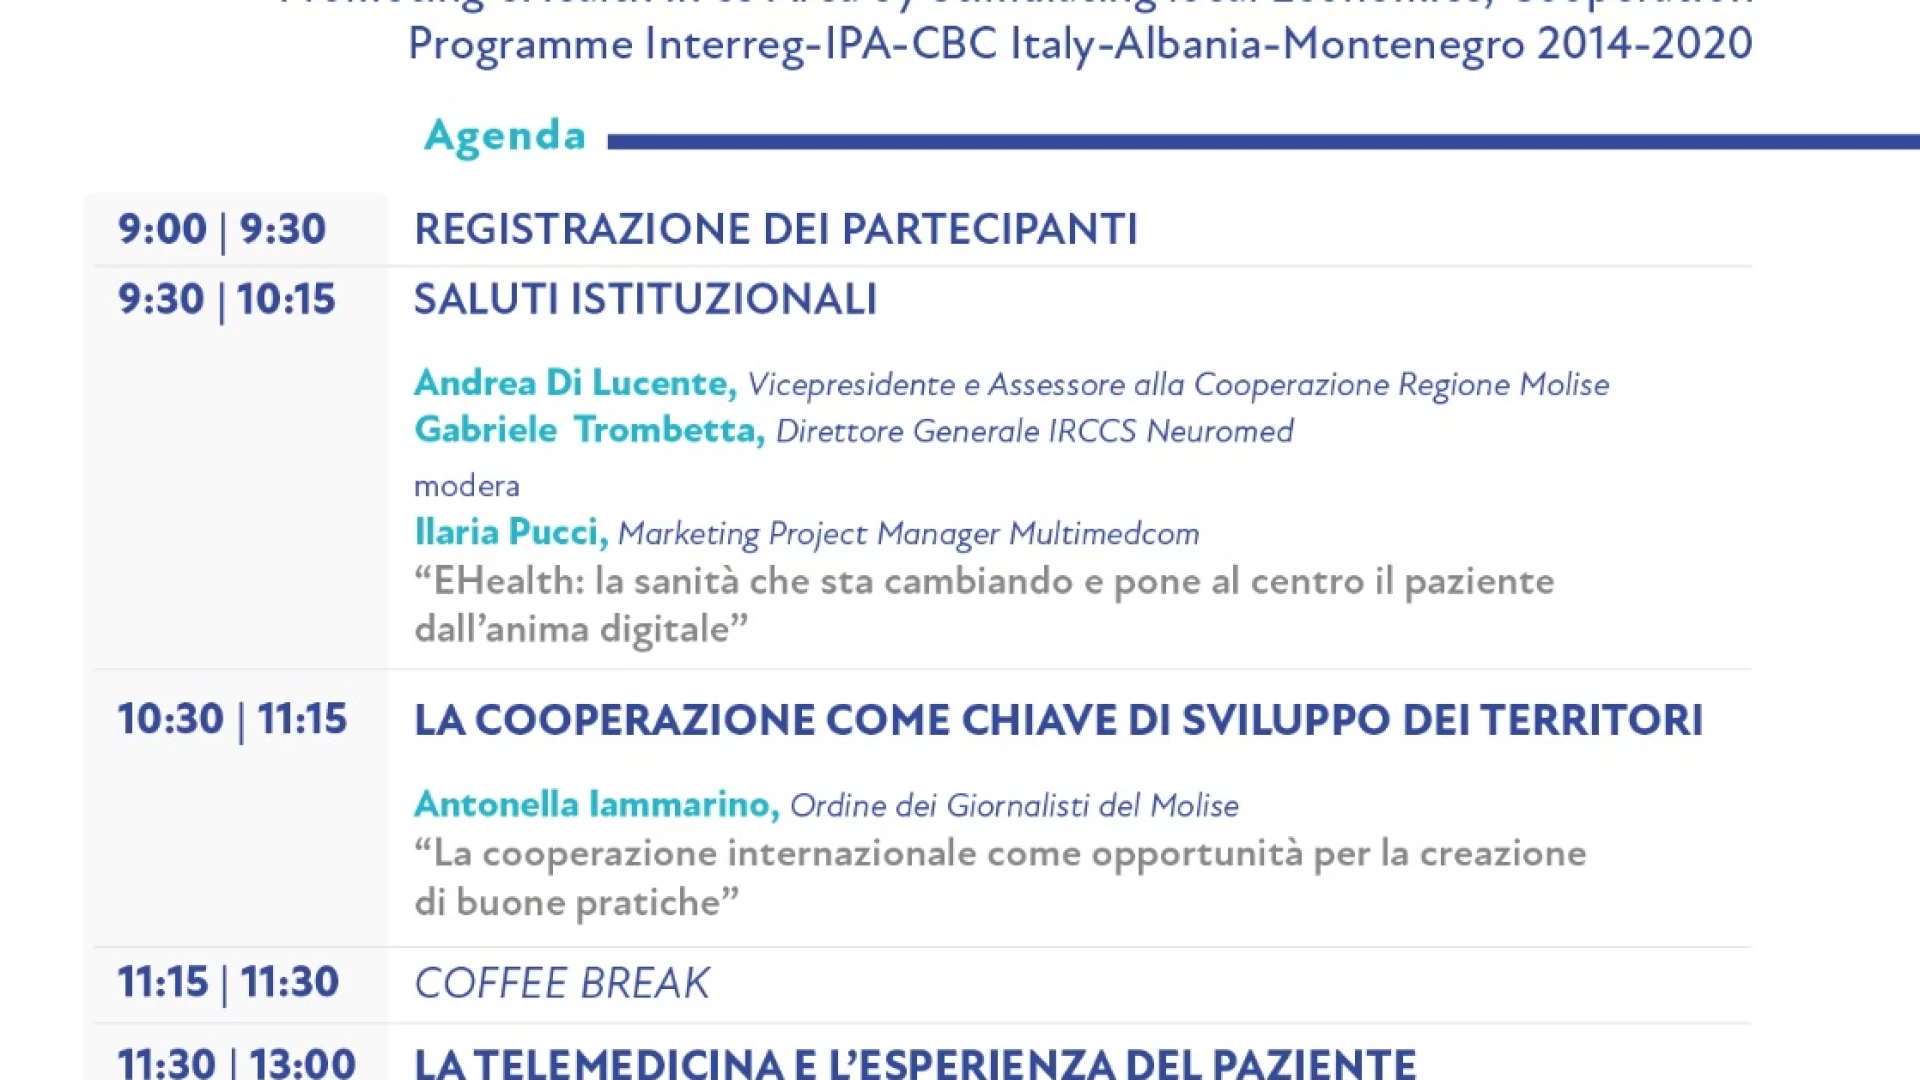 Progetto “PHASE – Promoting eHealth in cb Area by Stimulating local Economies”, Cooperation Programme Interreg-IPA-CBC Italy-Albania-Montenegro 2014-2020. Due appuntamenti in Molise.